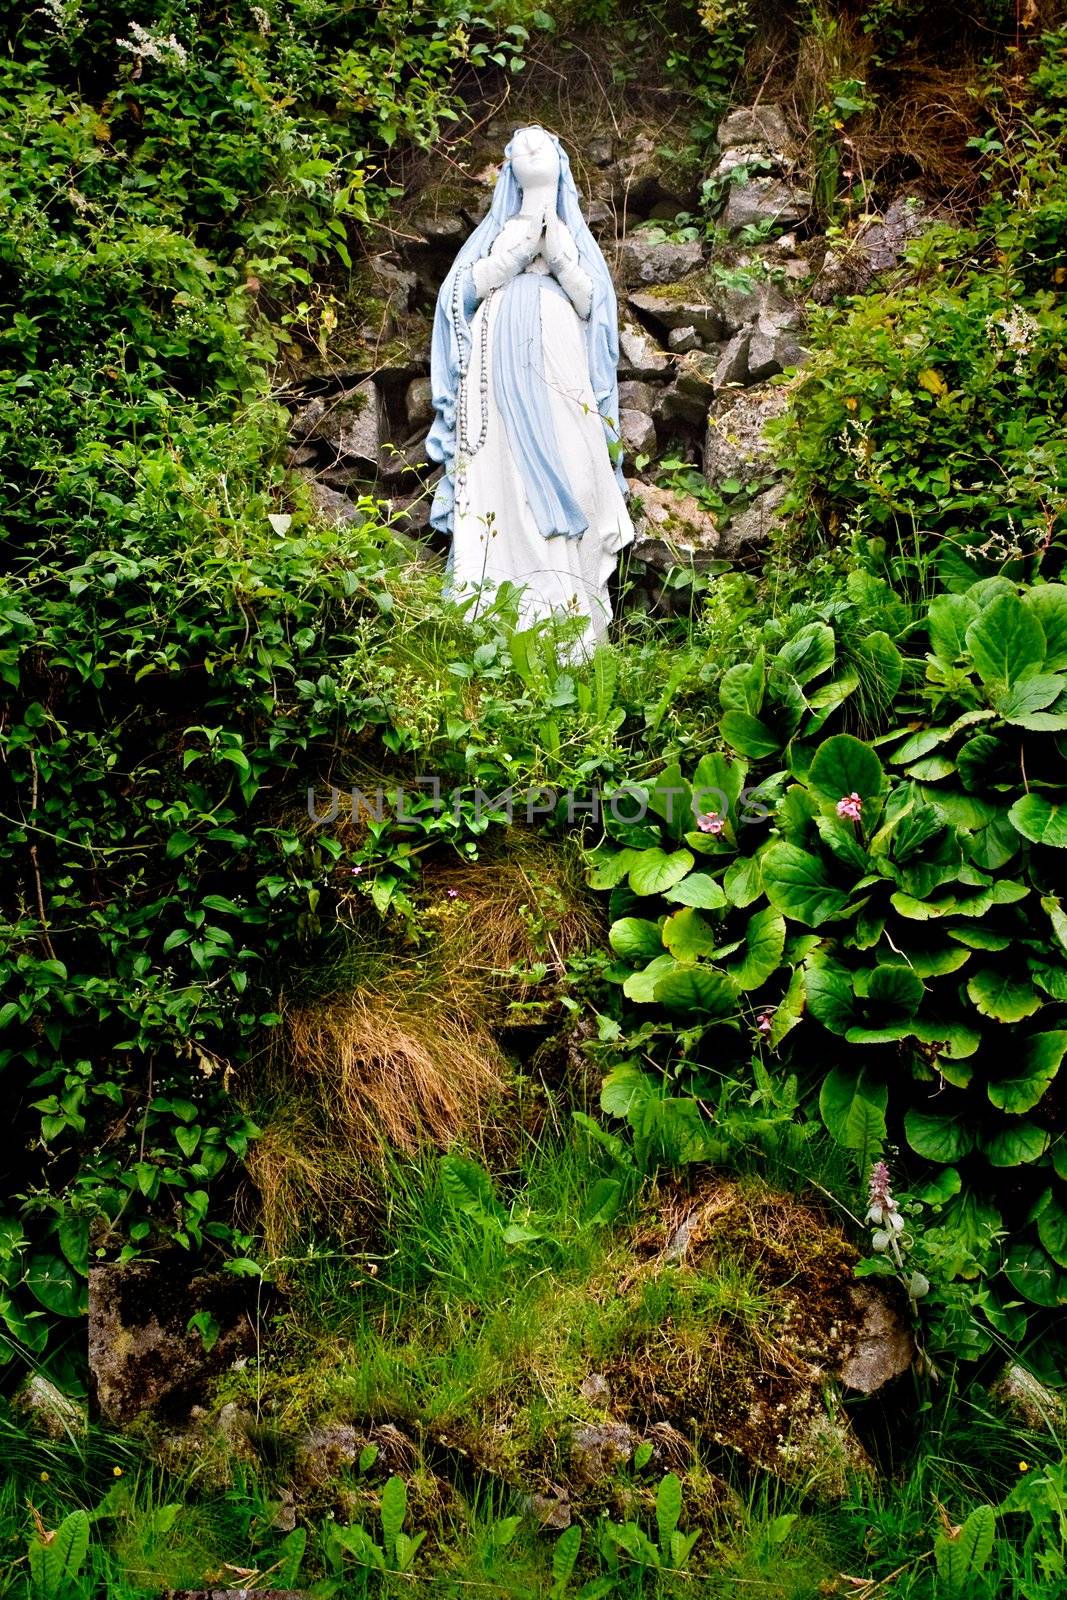 A statue of Virgin Mary on a hill surrounded by foliage